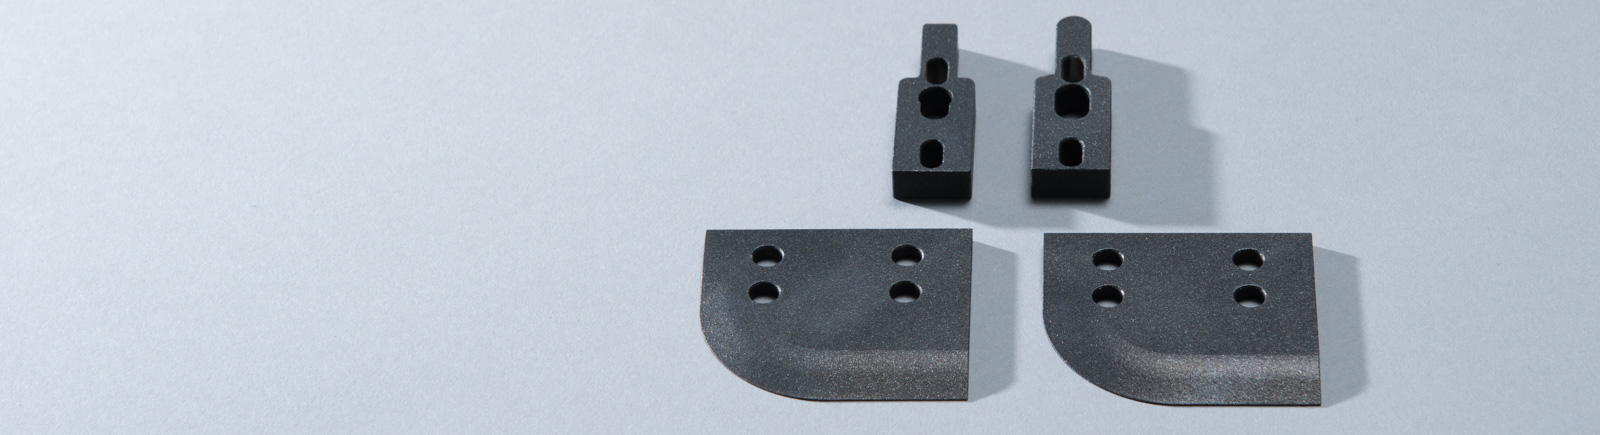 Construction parts coated with PTFE coating as nonstick coating